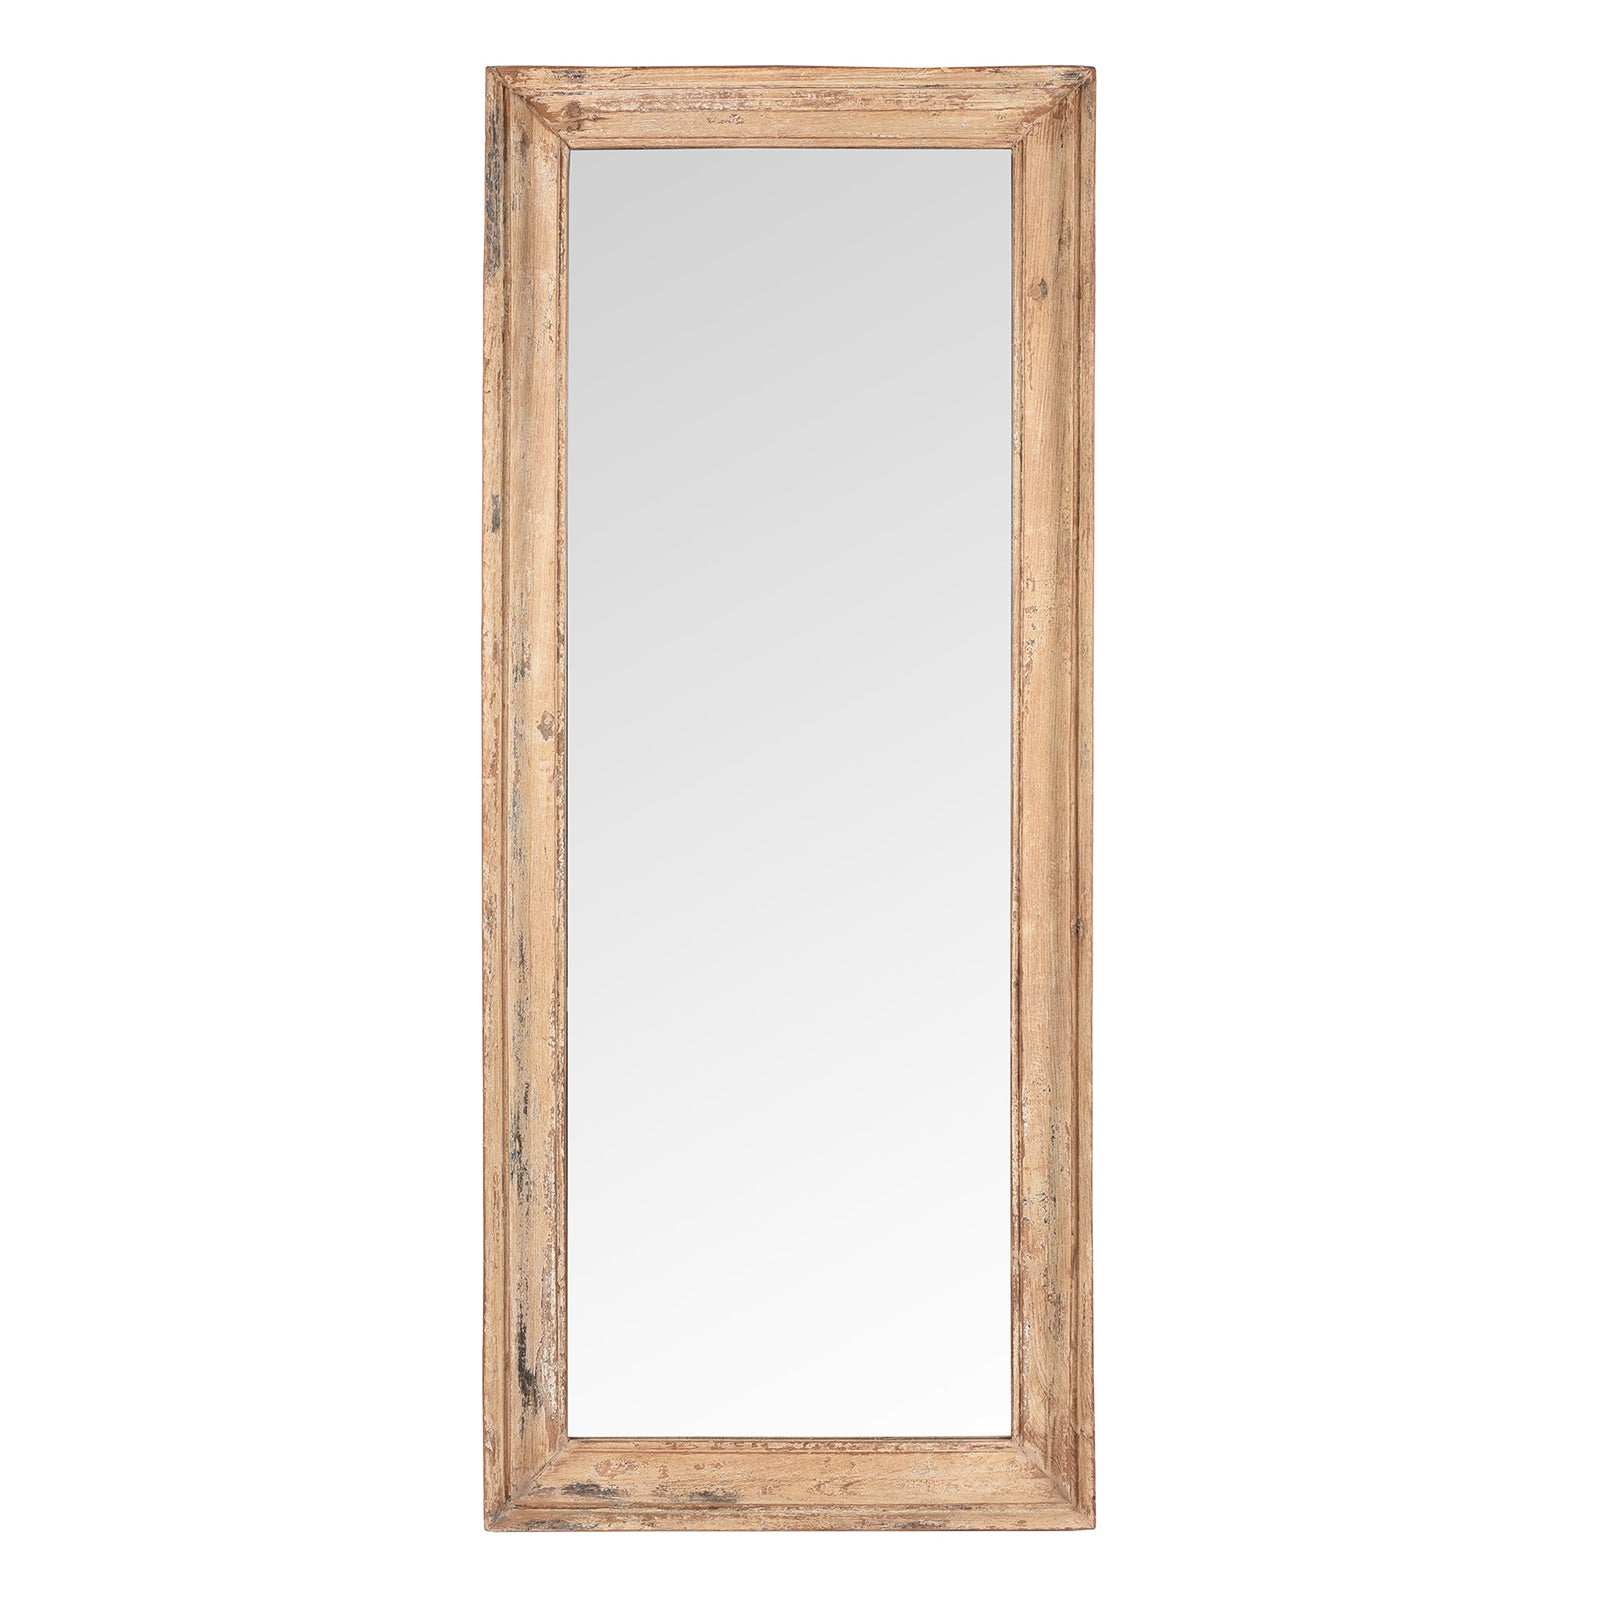 Cream Painted Mirror Made From Old Architectural Teak | Indigo Antiques